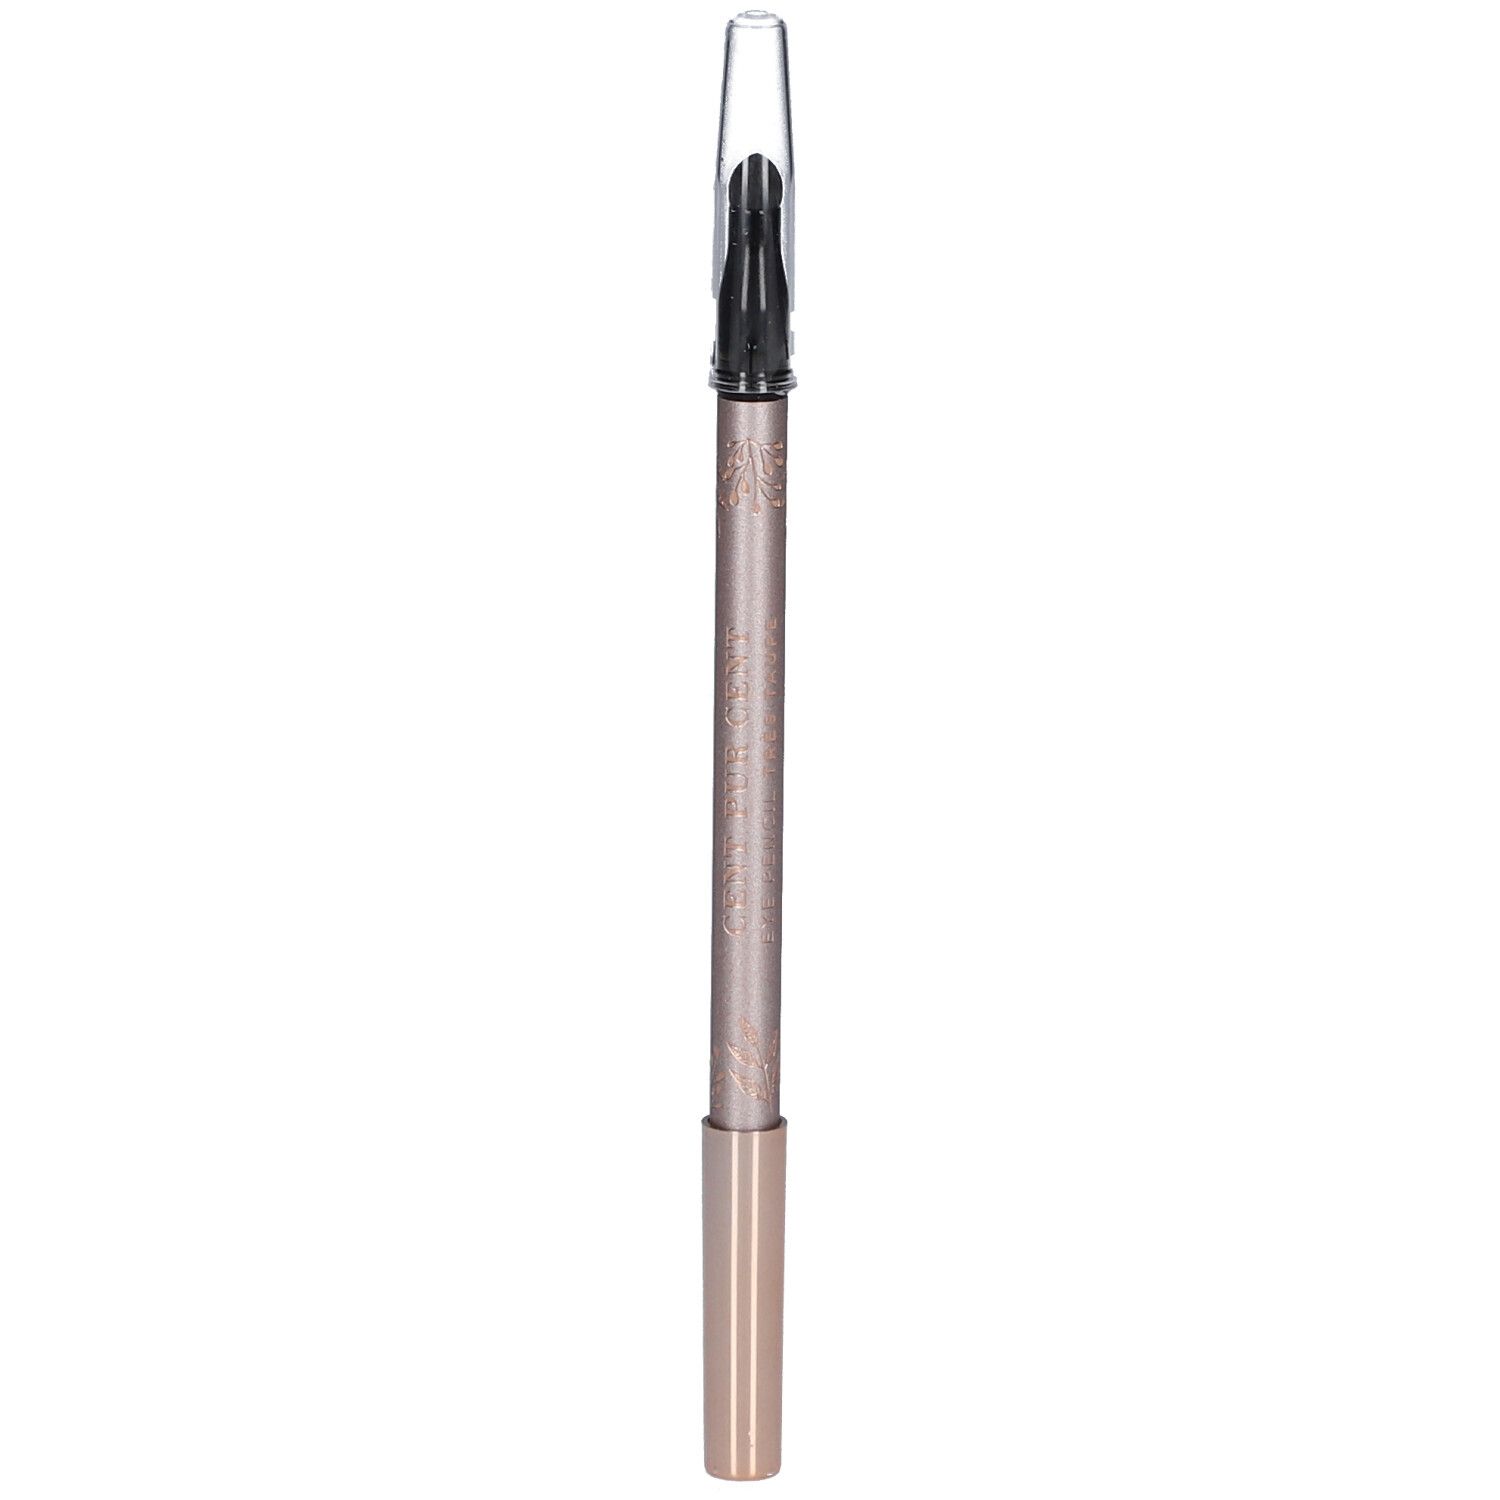 Cent PUR Cent New Eye Pencil Très Taupe